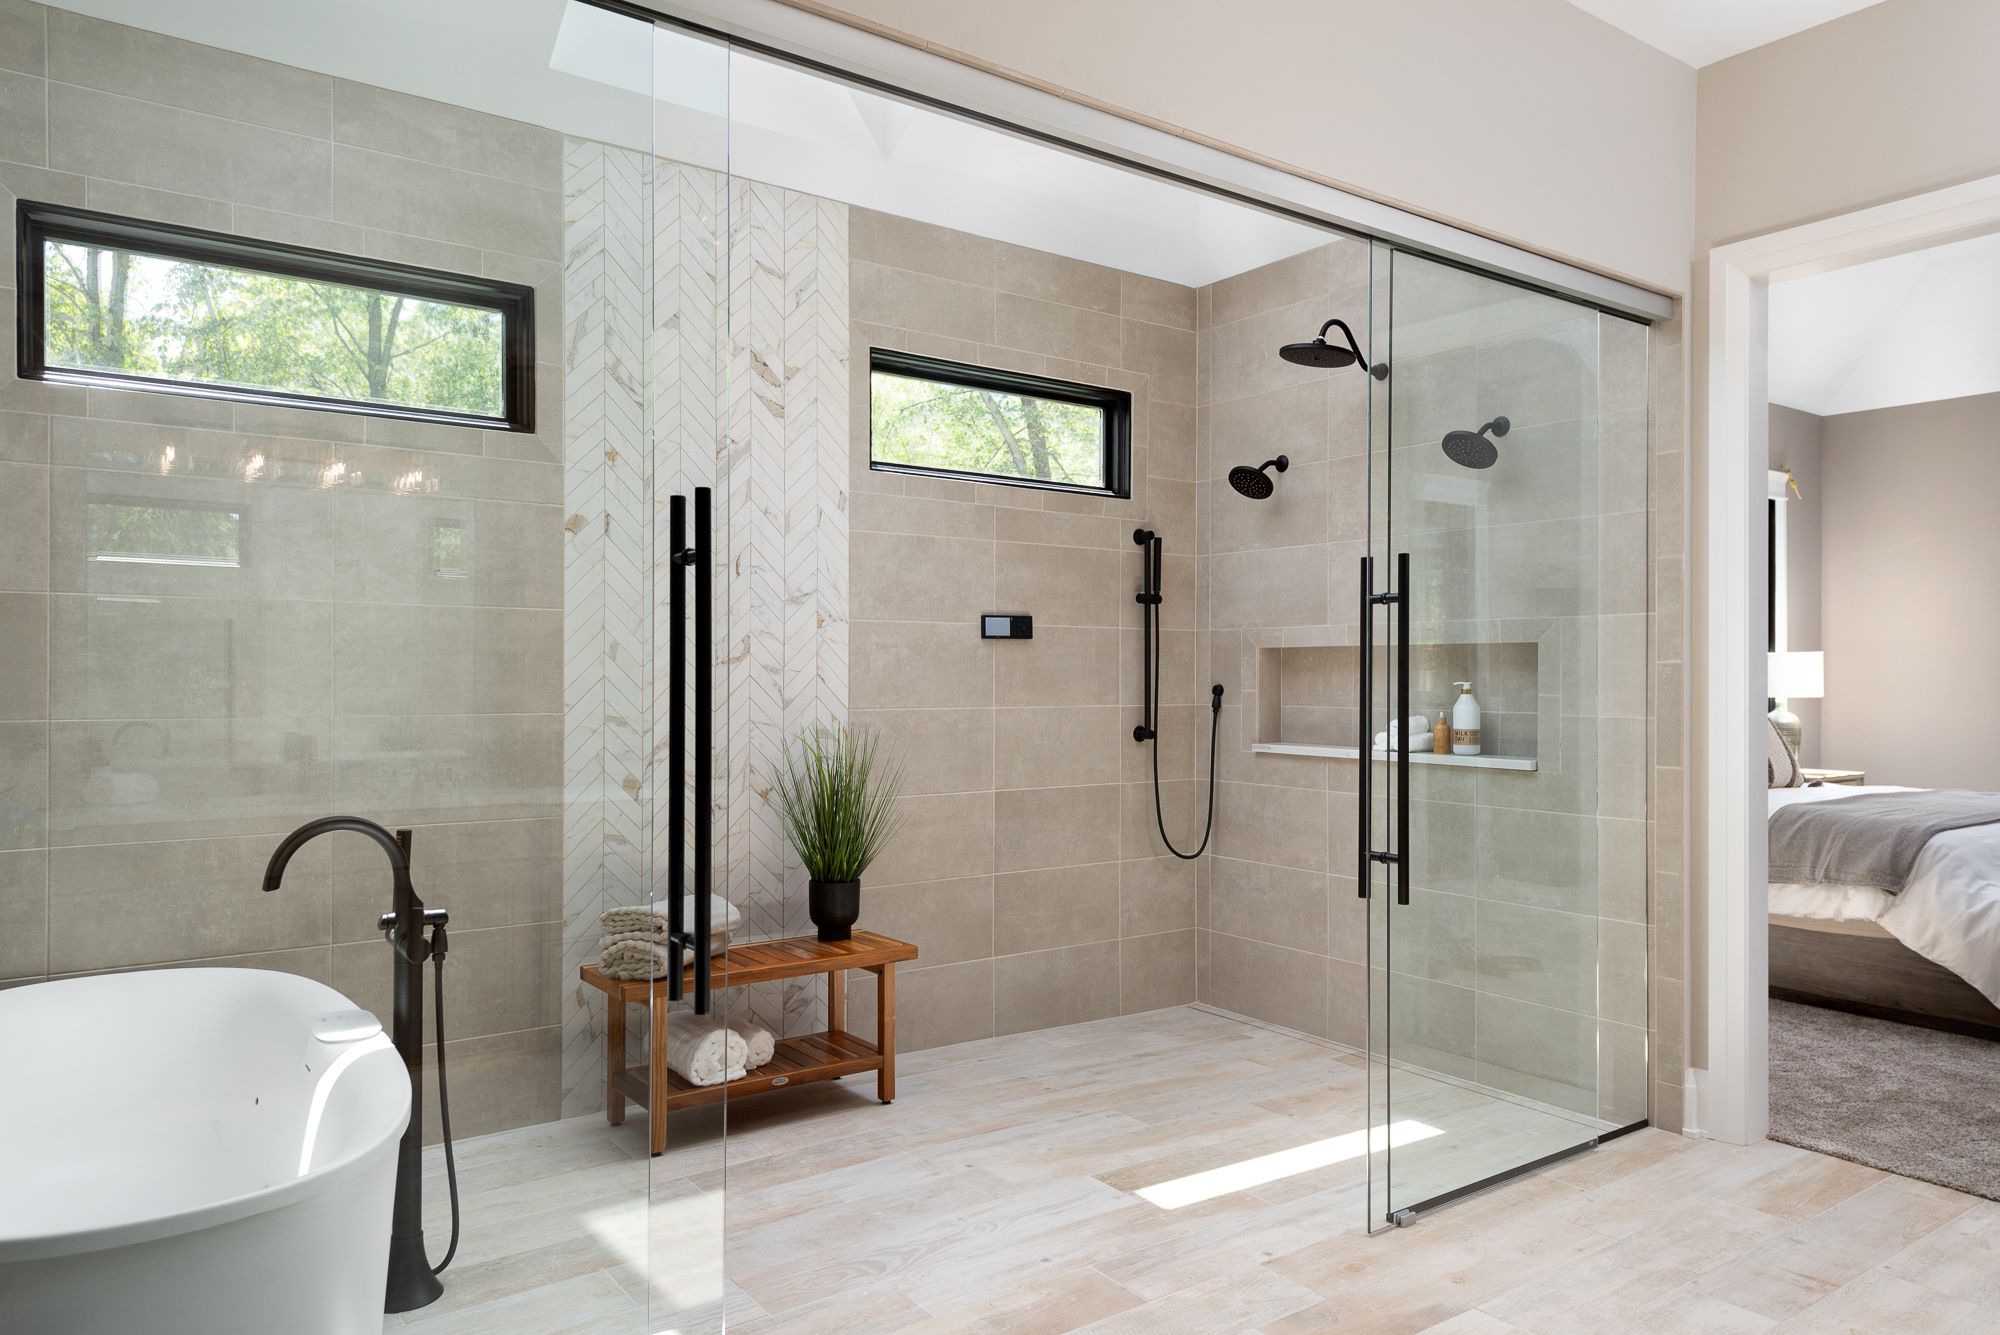 Wet room with glass doors, white tub and black plumbing fixtures